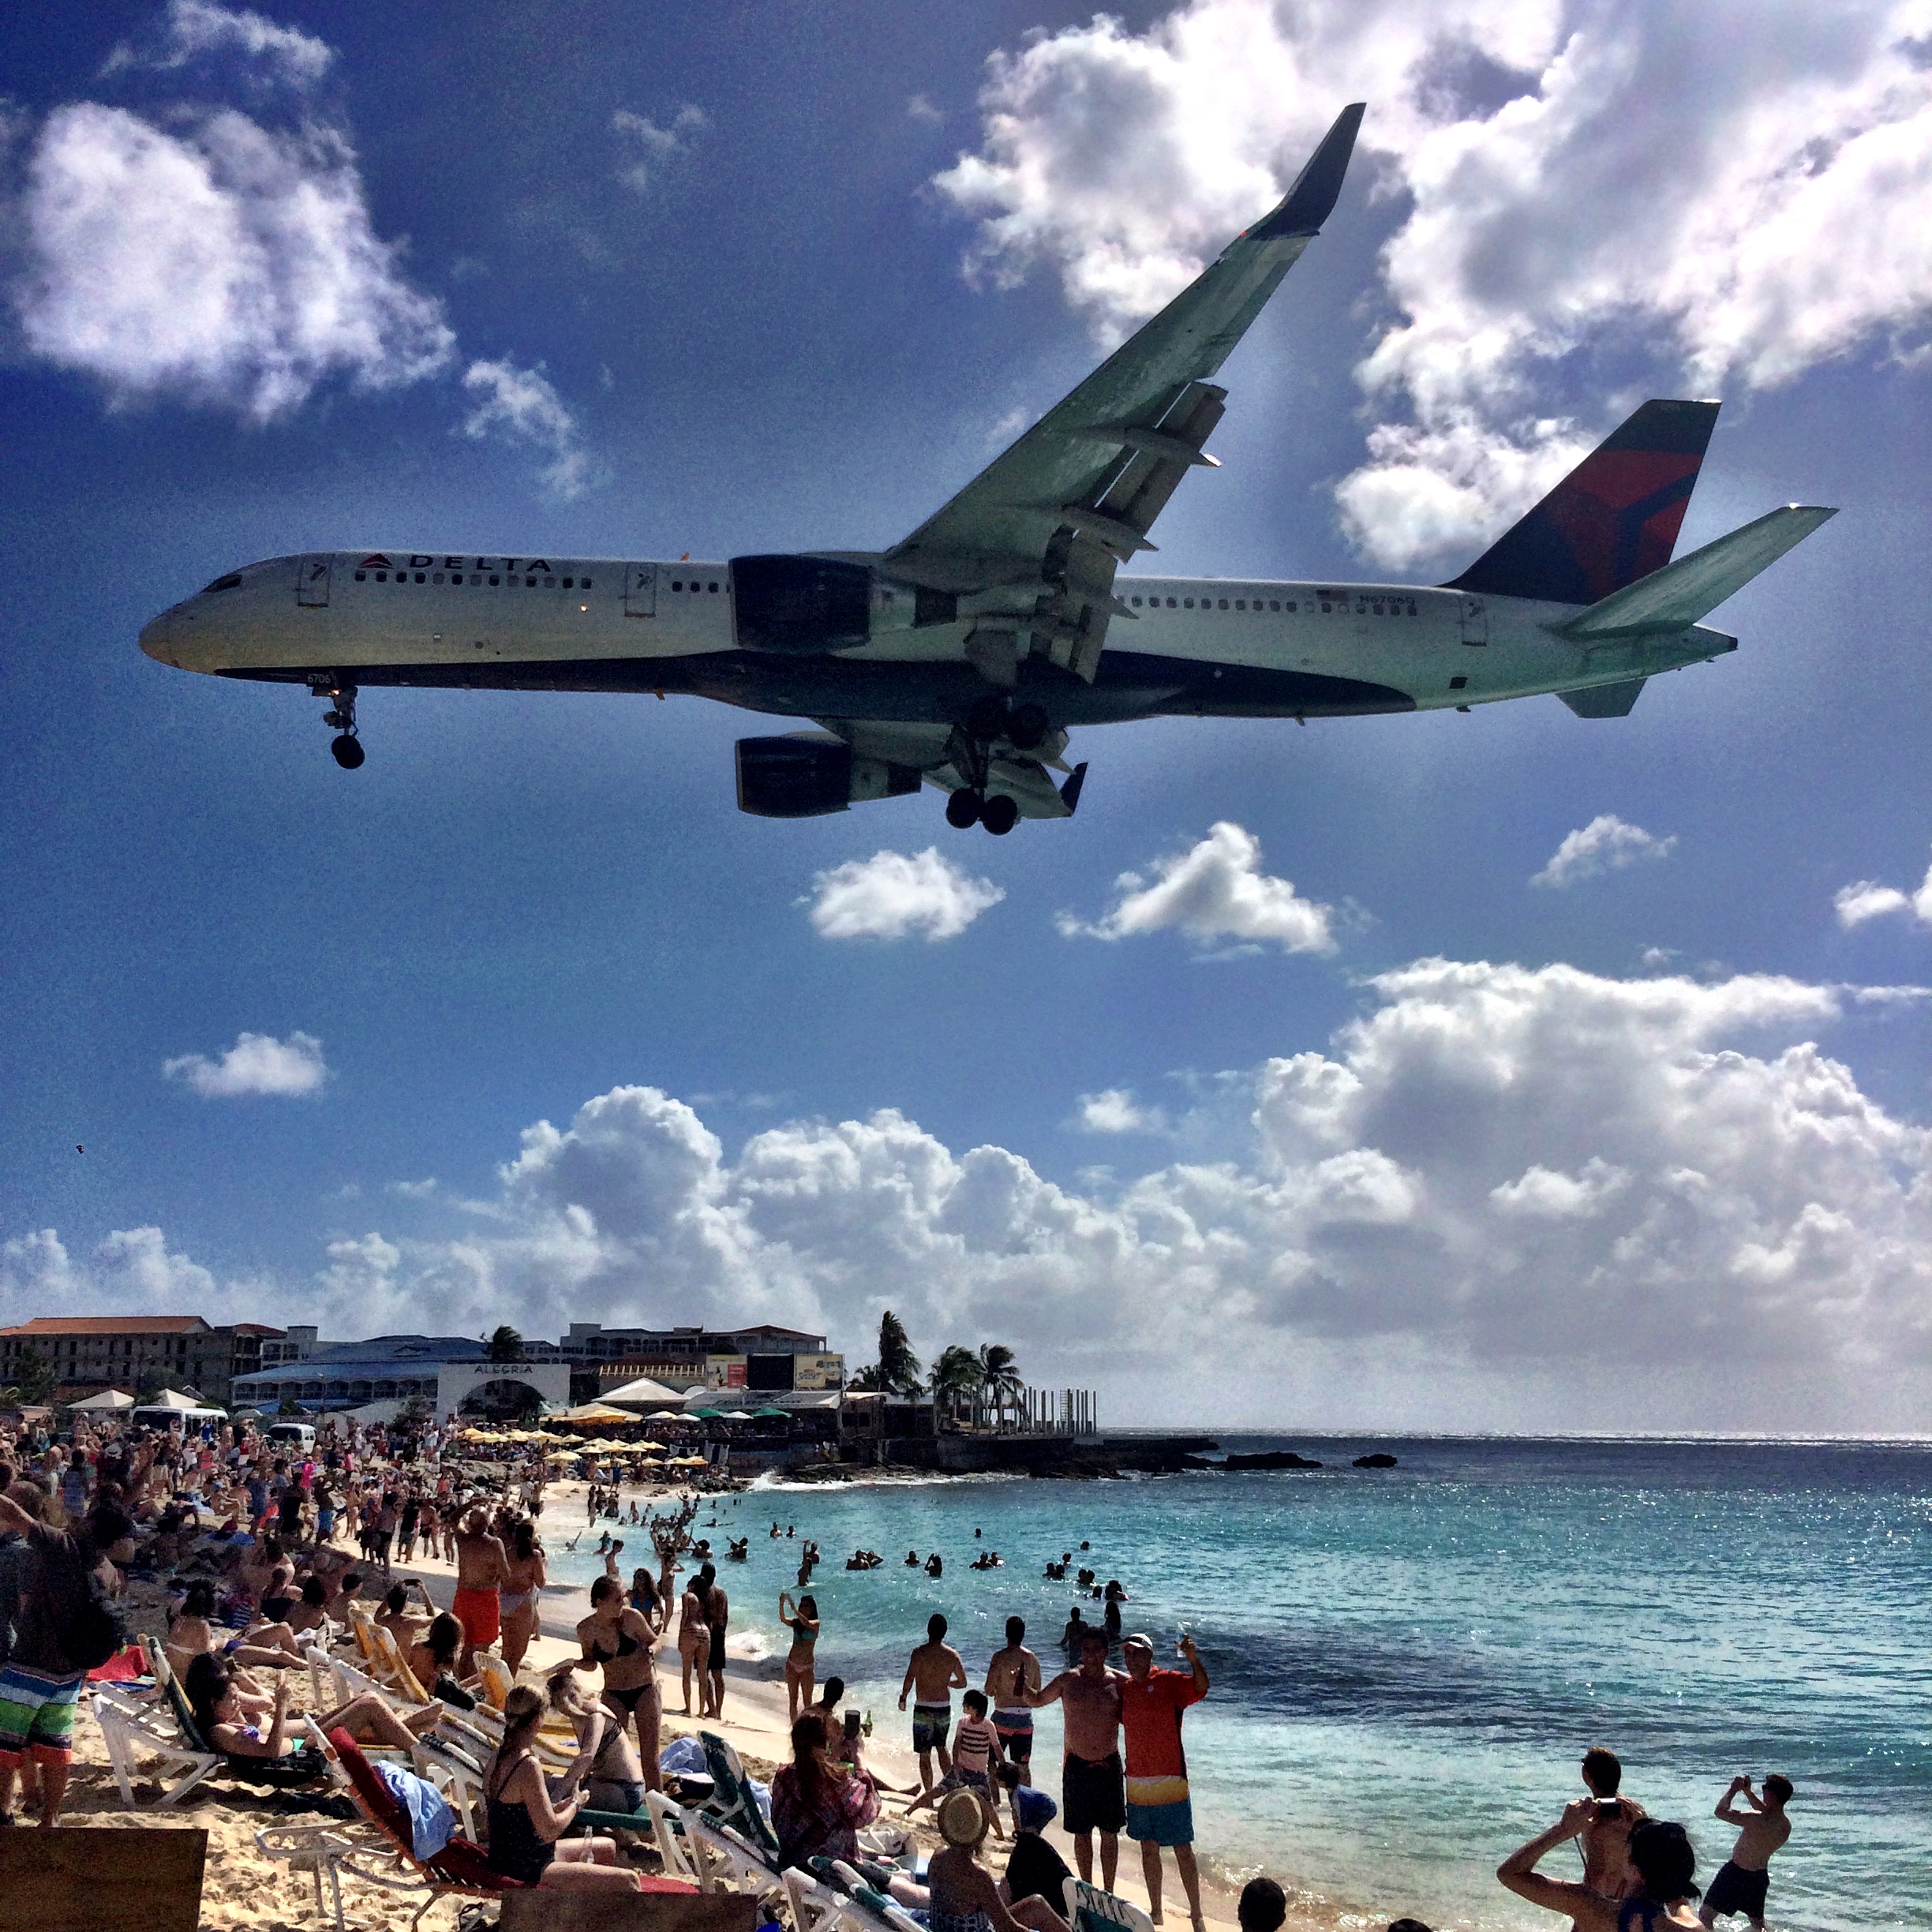 For a thrill activity in St Martin, check out Maho Beach.